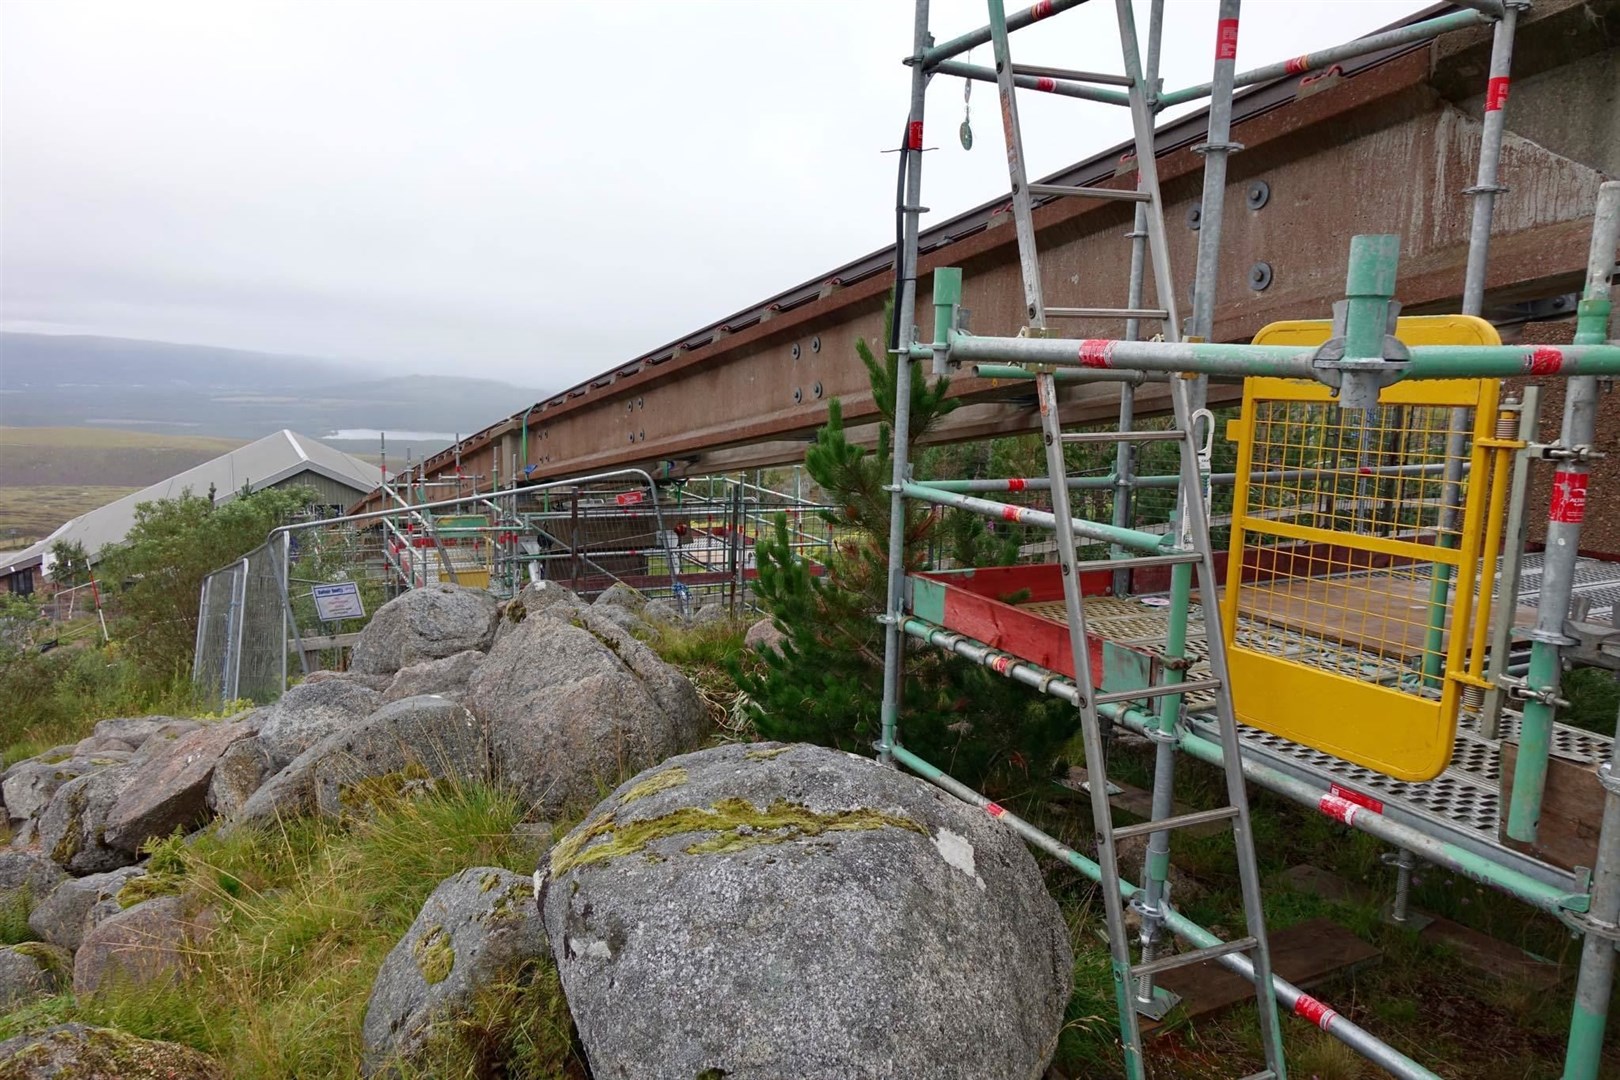 The concrete viaduct piers have been strengthened following safety concerns.